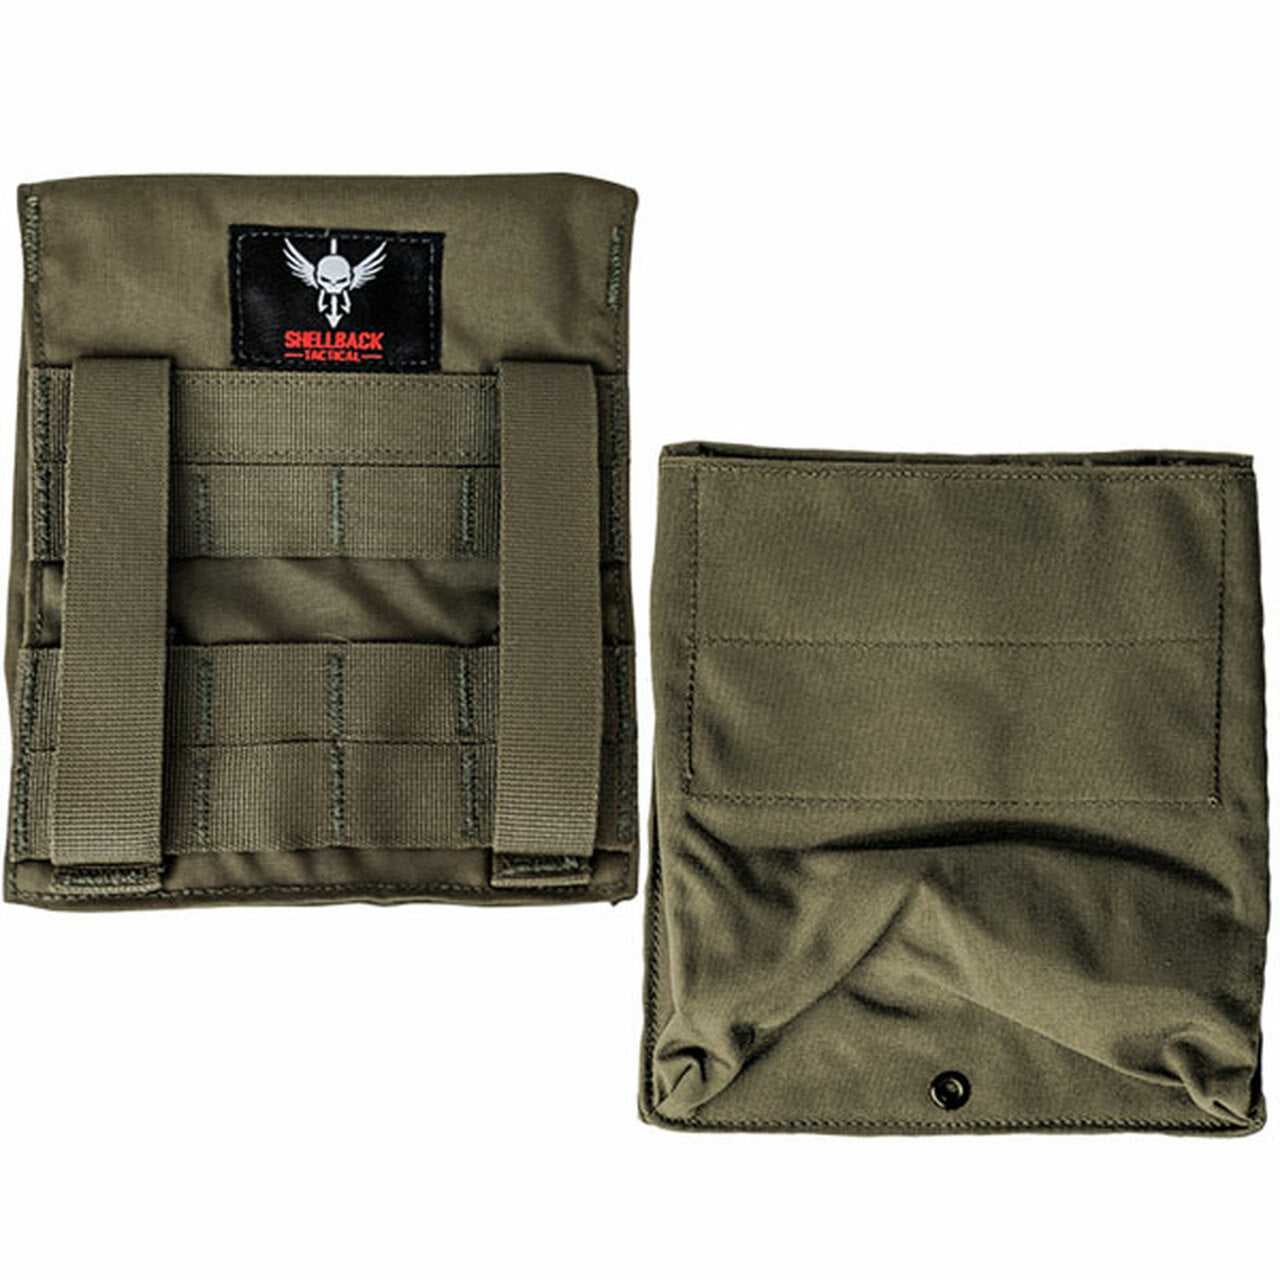 A Shellback Tactical Side Plate Pockets 2.0 - Set of 2 pouch with a red logo on it.